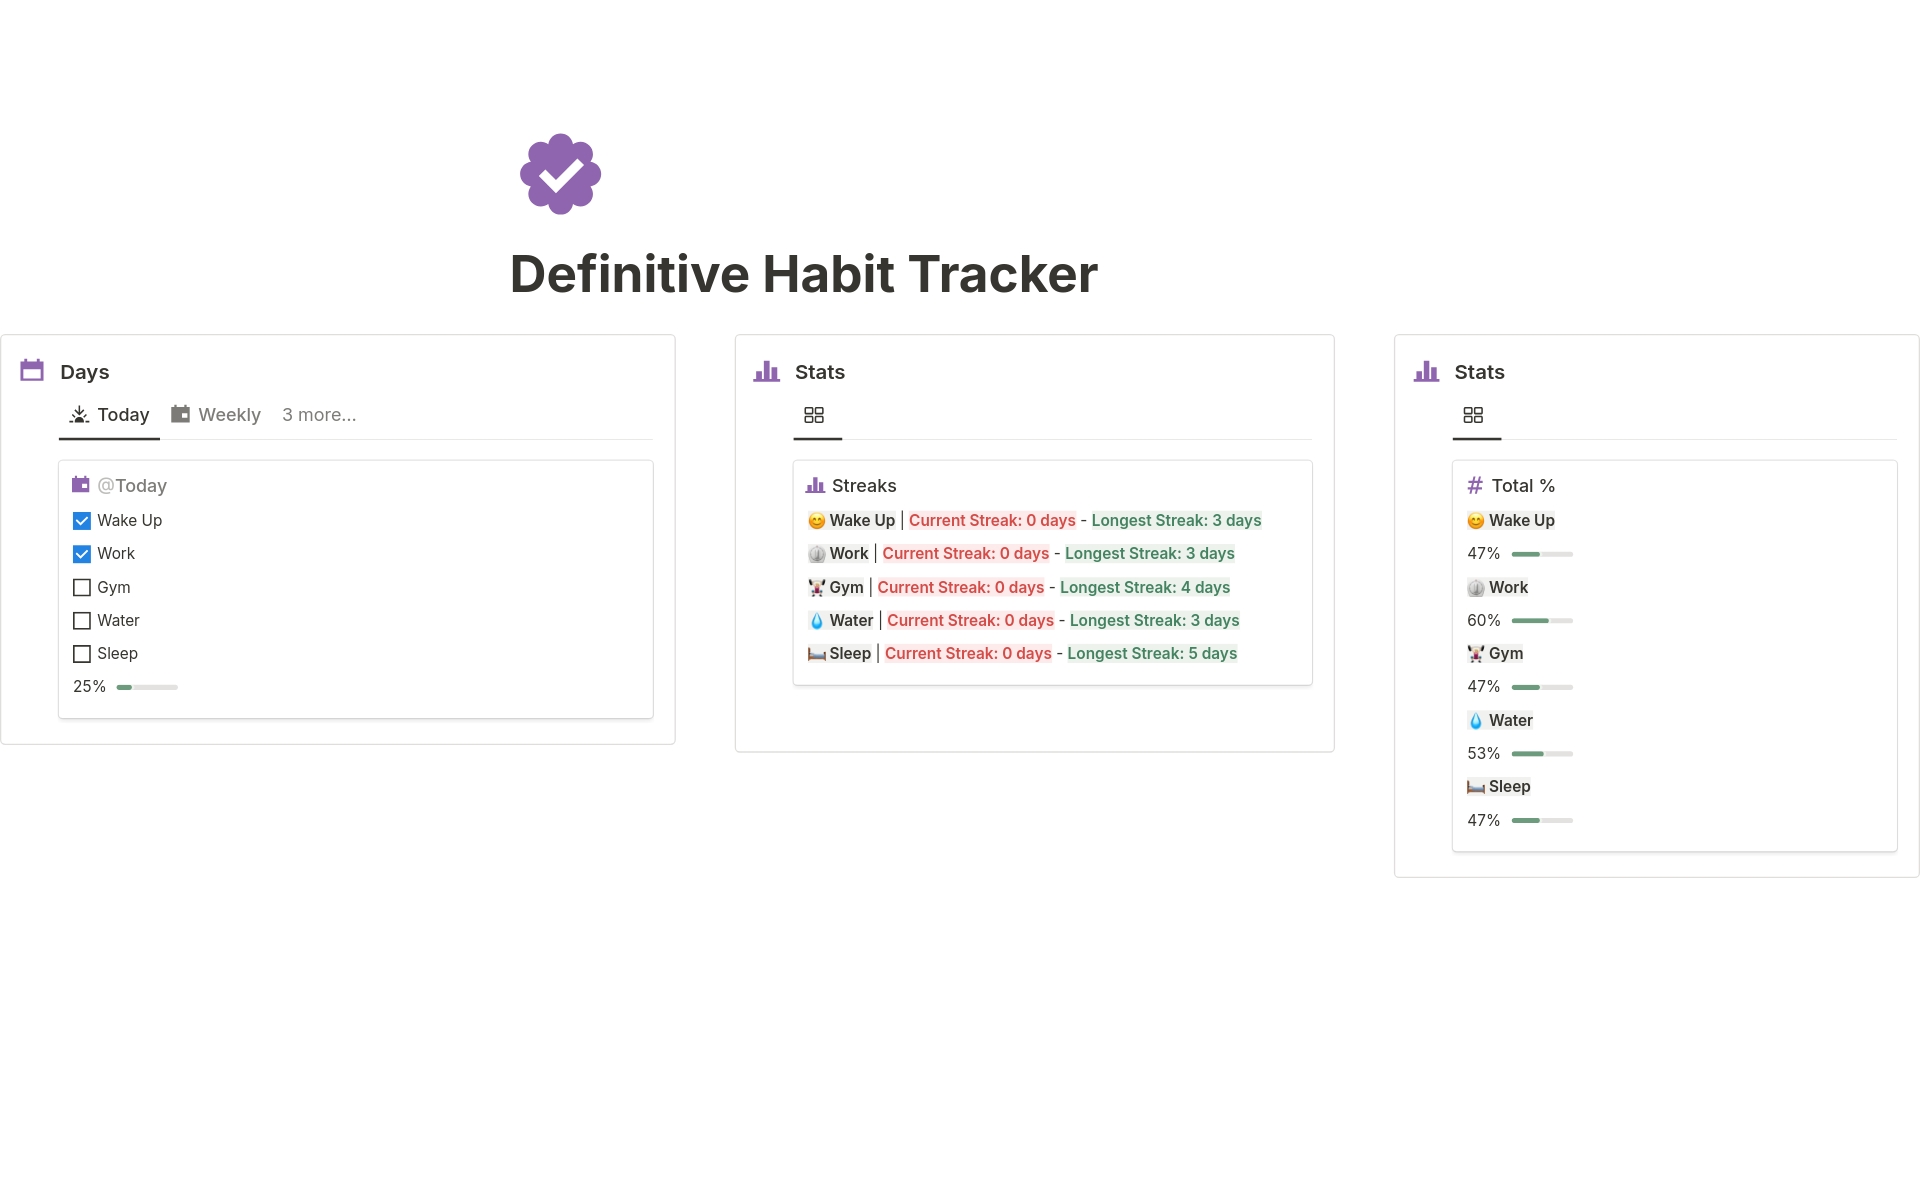 Are you looking for a Modern, New and Easy way to Track (and Follow) your Habits?

Do it for FREE Right Now with the Definitive Habit Tracking System in Notion.